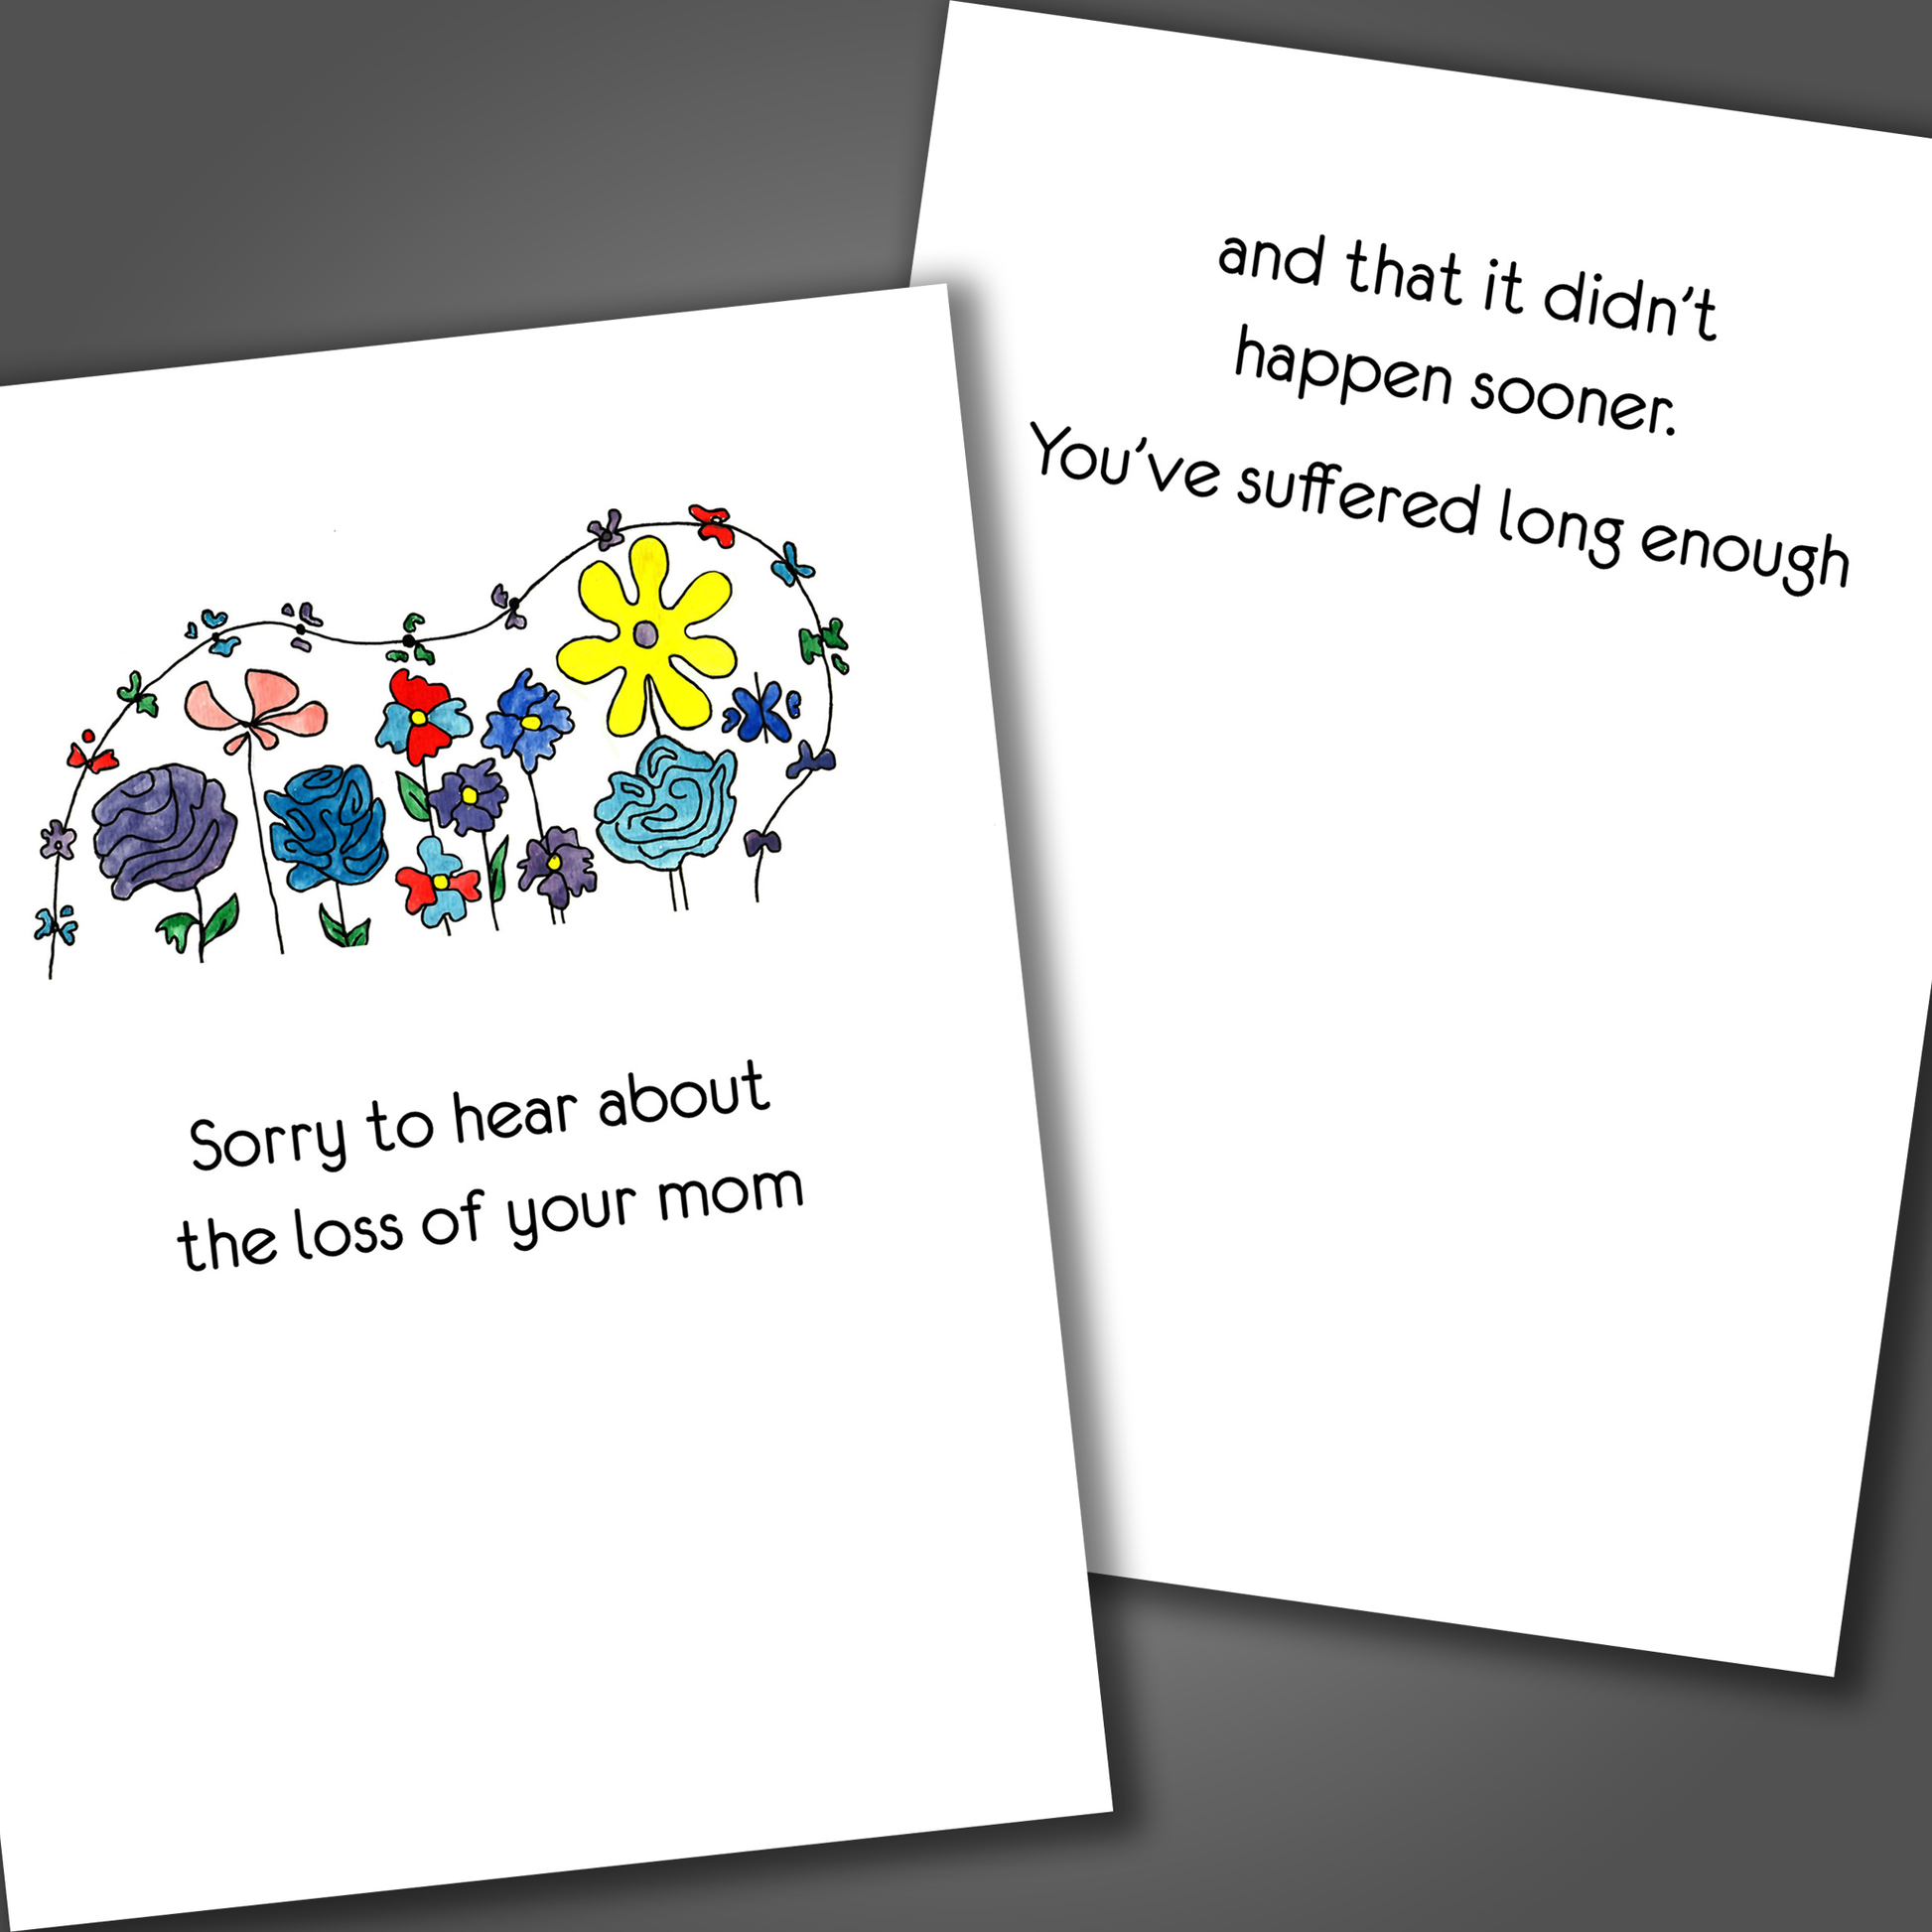 Funny sympathy card for loss of a mother with butterflies and flowers drawn on the front of the card. Inside the card is a funny joke that ends with you've suffered long enough.